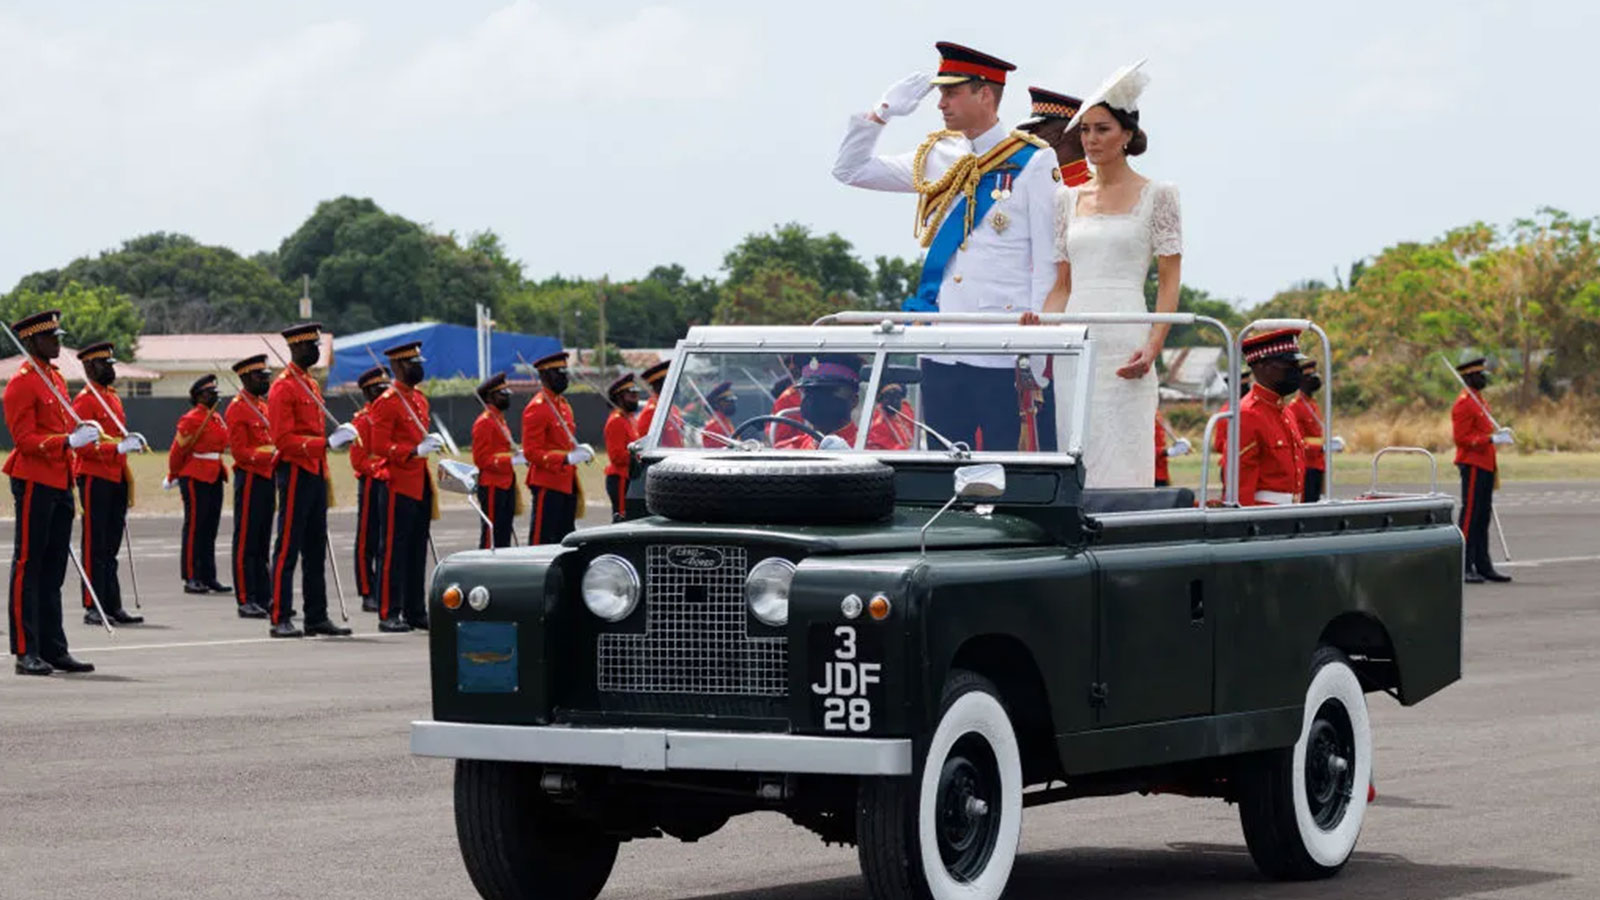 Catherine, Duchess of Cambridge and Prince William, Duke of Cambridge, ride in a Land Rover 